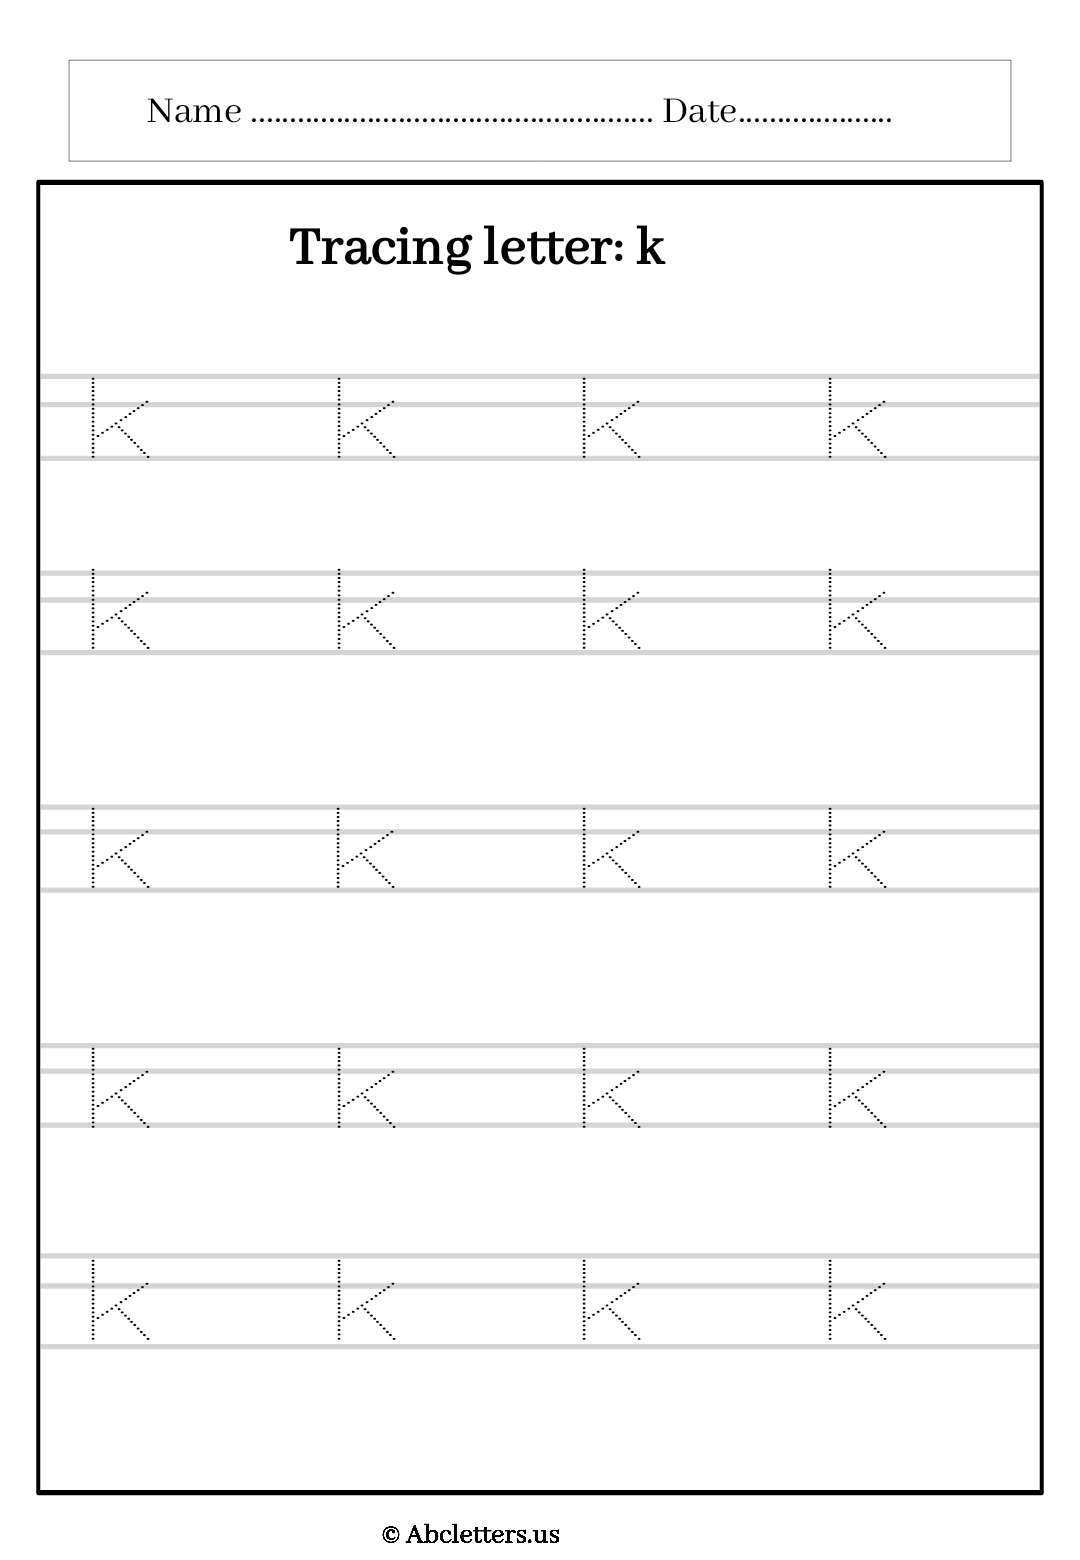 Tracing letter k lowercase with 3 lines